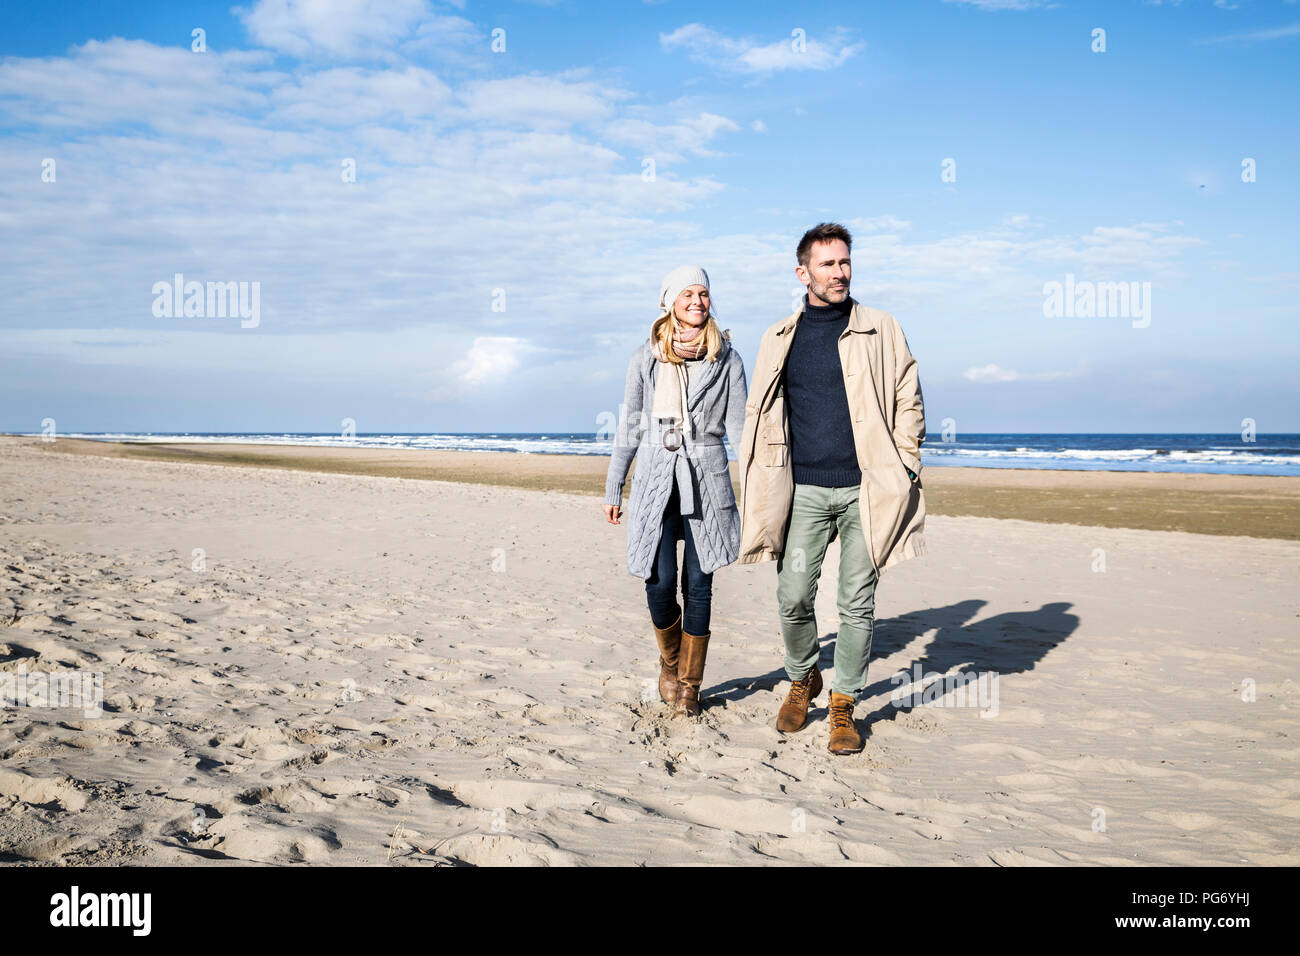 Couple in warm clothing walking on the beach Stock Photo